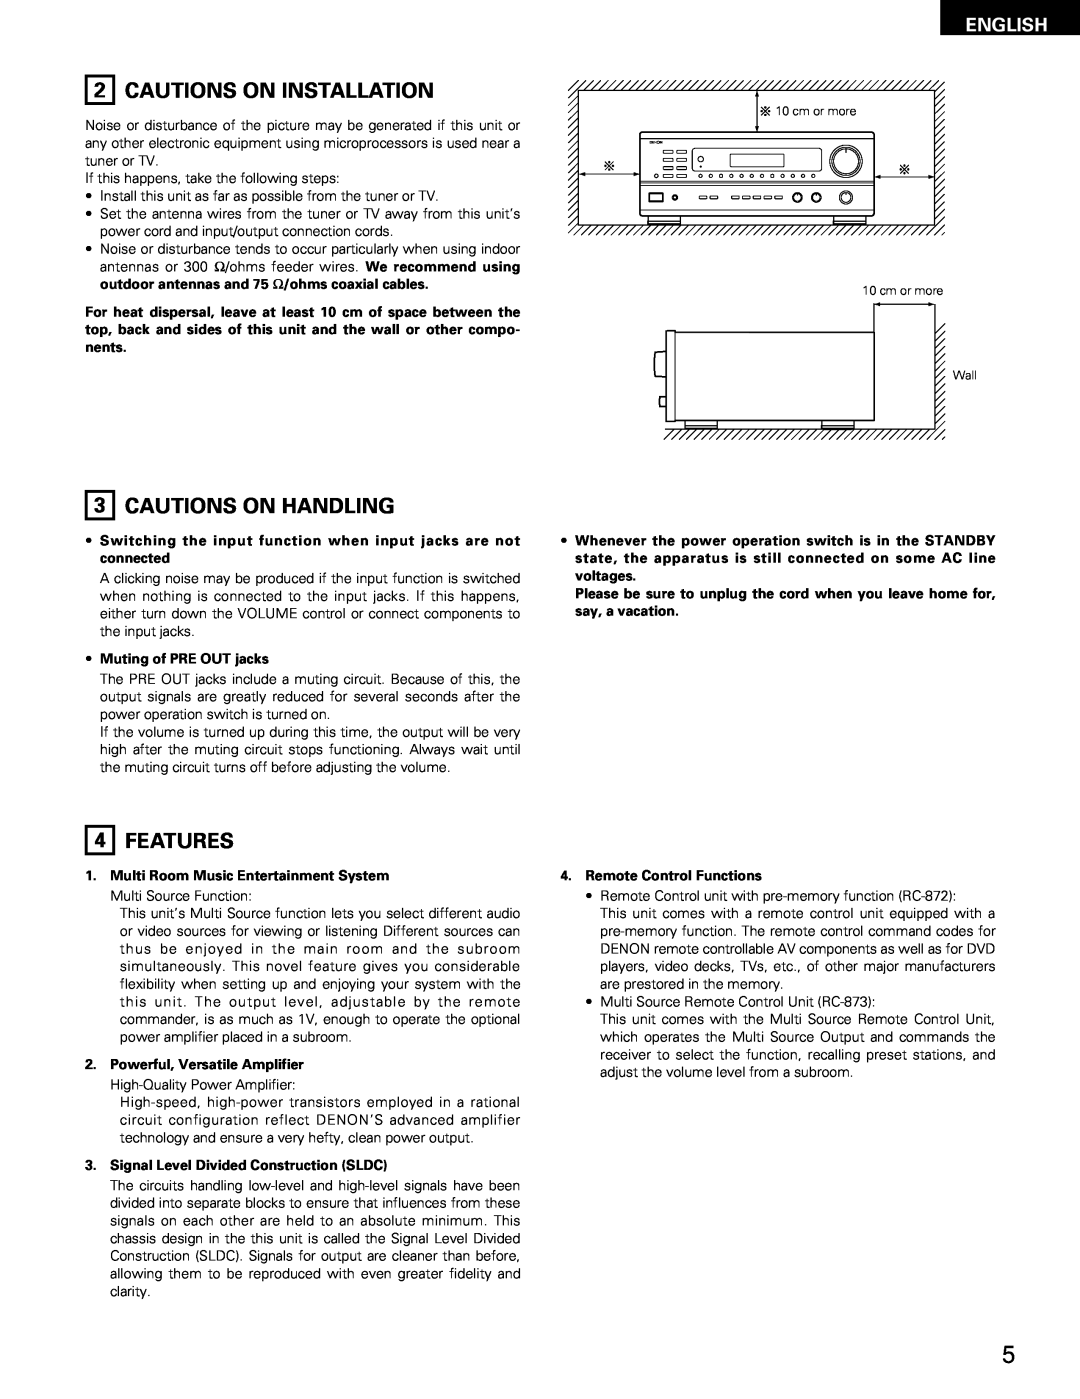 Denon DRA-685 manual Cautions On Installation, 3CAUTIONS ON HANDLING, 4FEATURES, English 